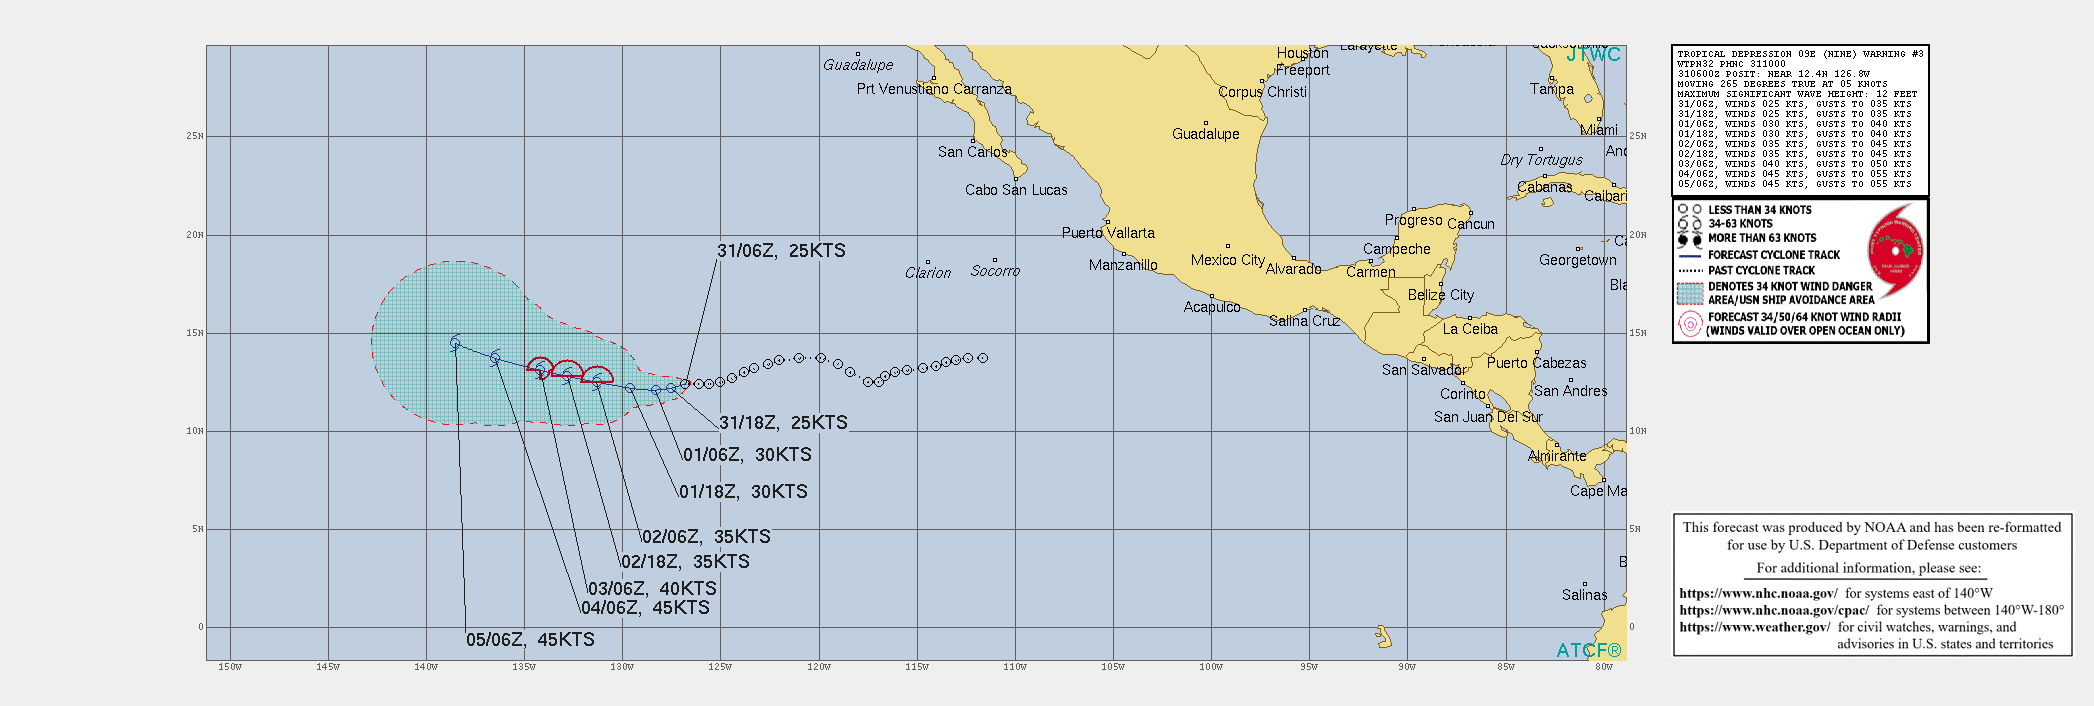 09E. WARNING 3 ISSUED AT 31/10UTC. INTENSITY FORECAST TO PEAK AT 45KNOTS BY 96H.